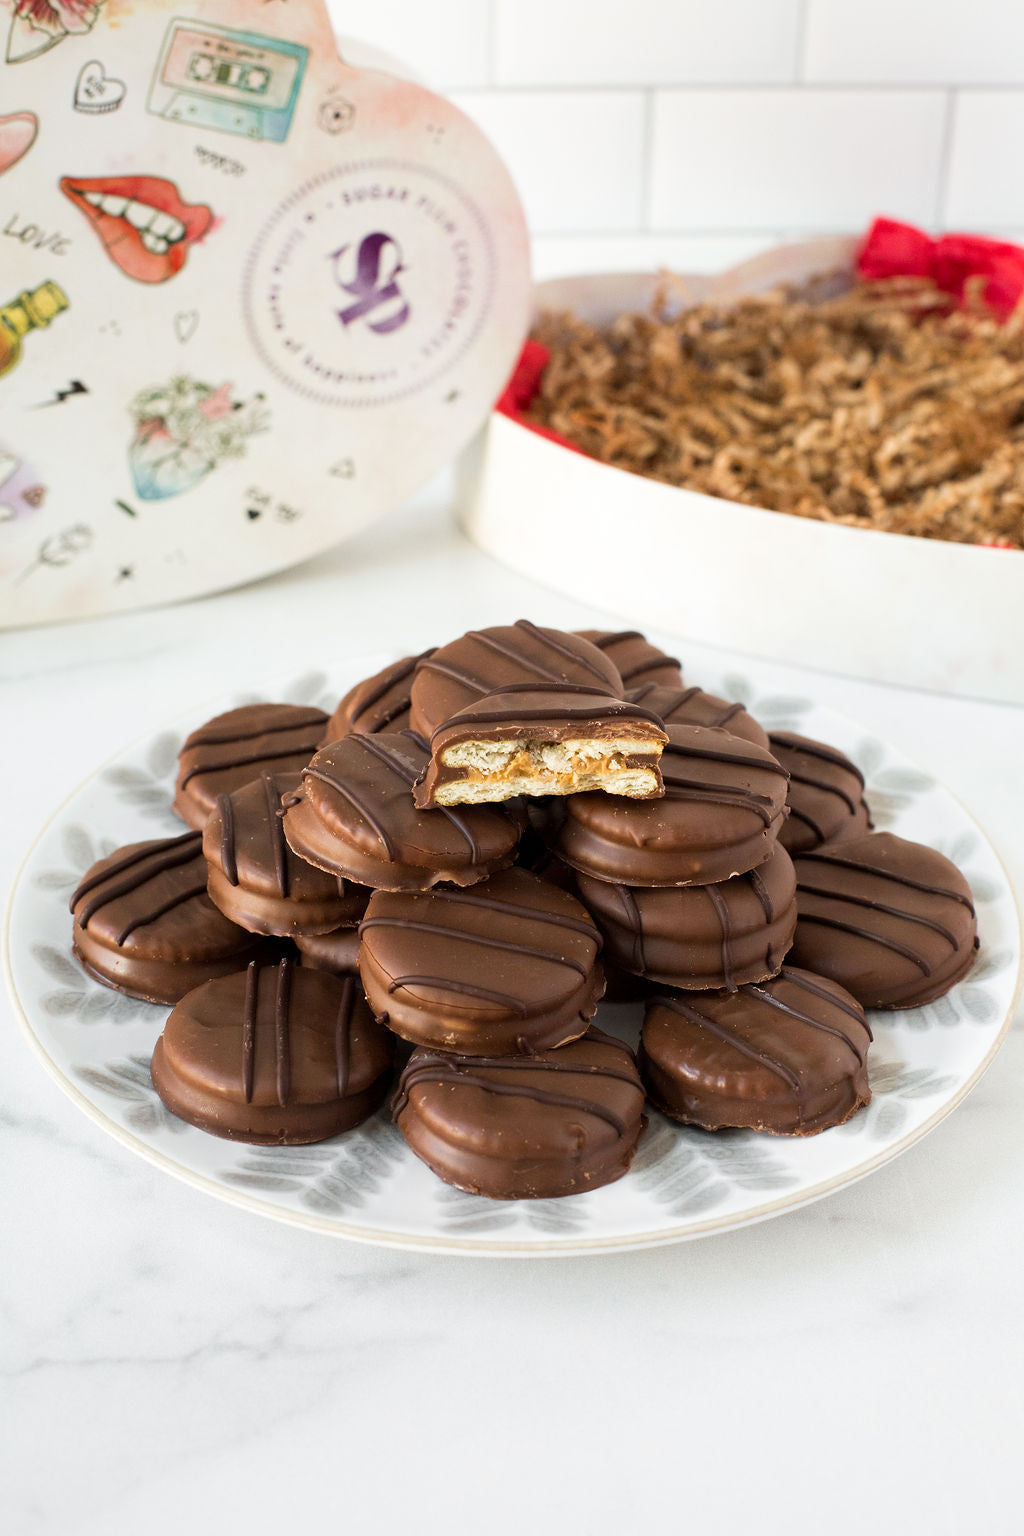 A 20 Pieces Milk Chocolate filled with Peanut Butter Cookies on a plate.